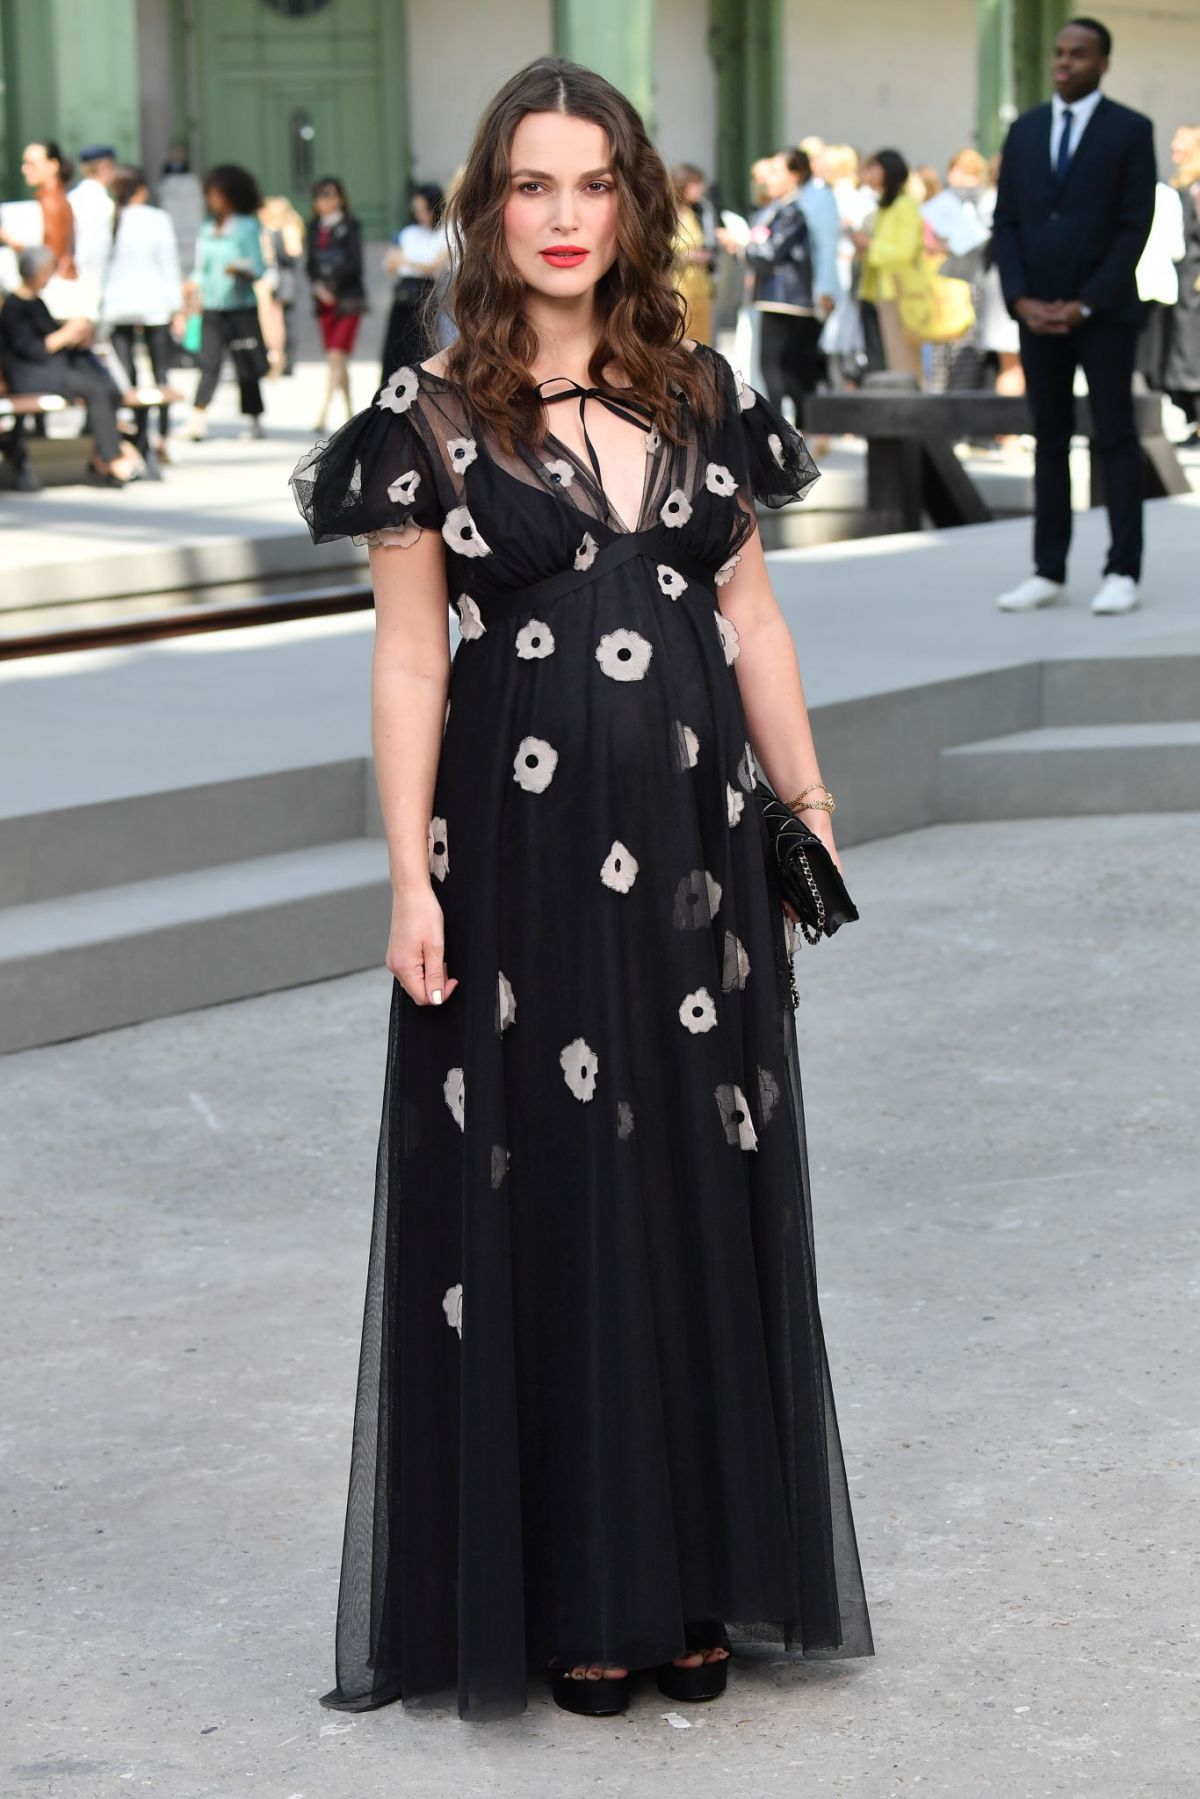 Pregnant KEIRA KNIGHTLEY at Chanel Cruise Collection 2020 Show in Paris ...